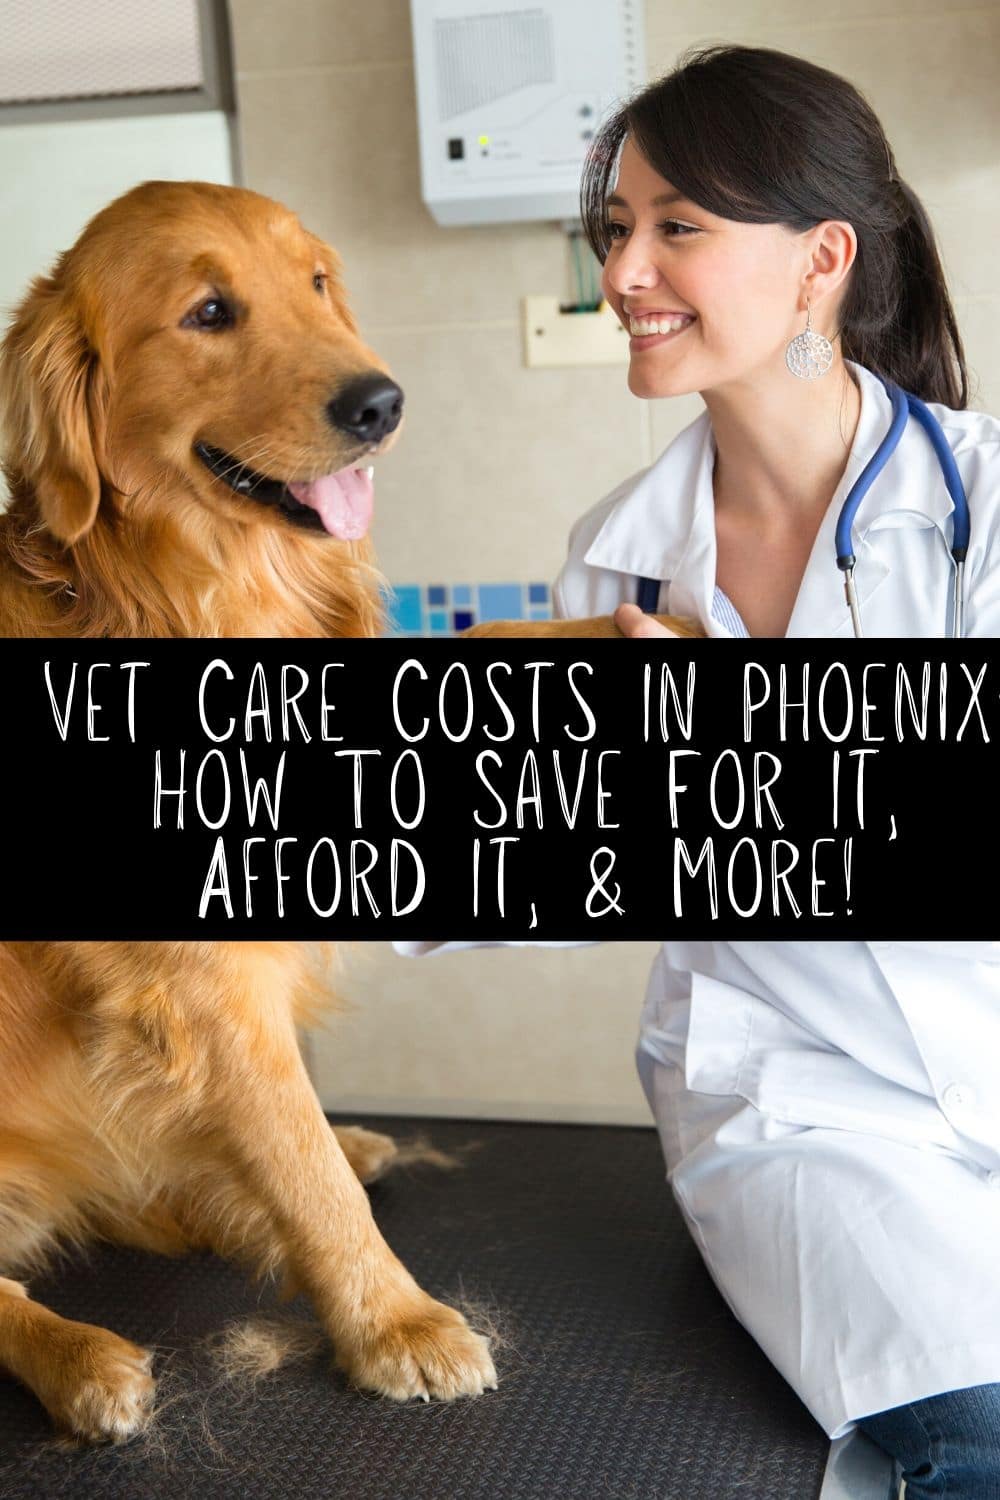 Vet care costs in Phoenix and other places can be pricey depending on what is going on with your pet. Before you bring a new pet home, or before you head into a costly vet procedure it's important to know these tips and tricks for keeping your costs low!